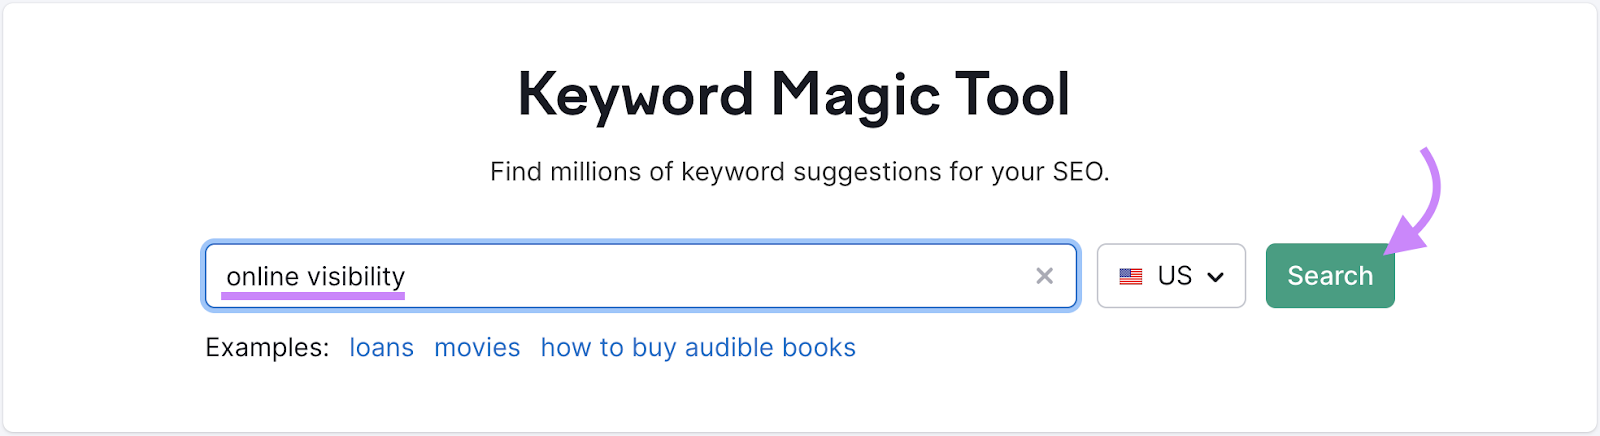 "online visibility" entered into Keyword Magic Tool's search bar